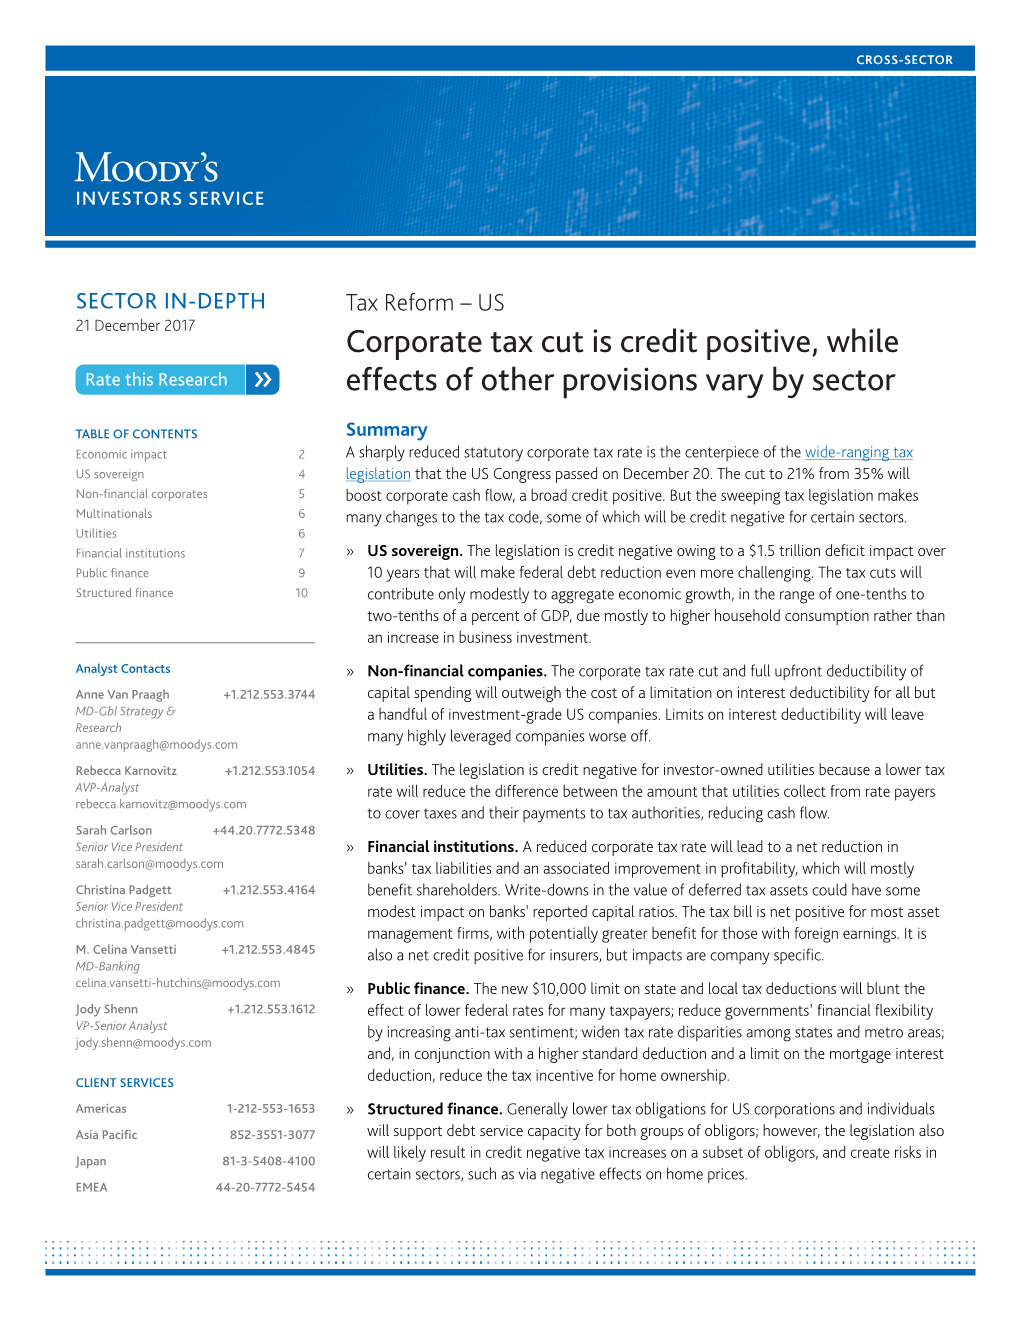 Corporate Tax Cut Is Credit Positive, While Effects of Other Provisions Vary by Sector